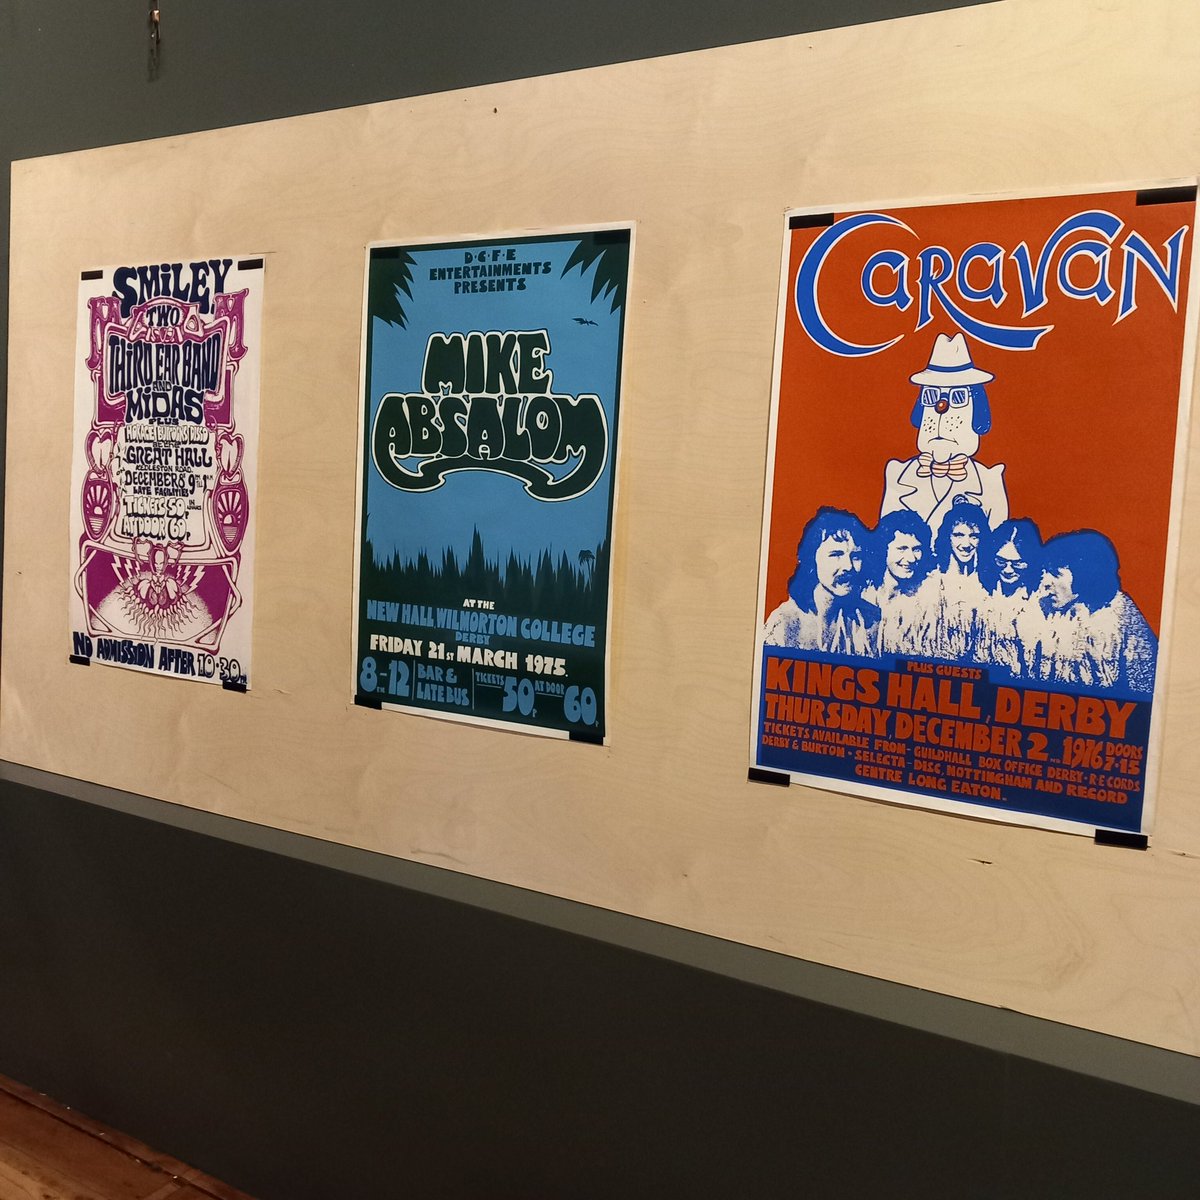 I've rotated the Derby Gig Posters today, so some of the others from the collection on display @derbymuseums Thanks for the comments and memories. #mikeabsalom #caravan #doctorsofmadness #richardstrange #kingshallderby #greathallderby